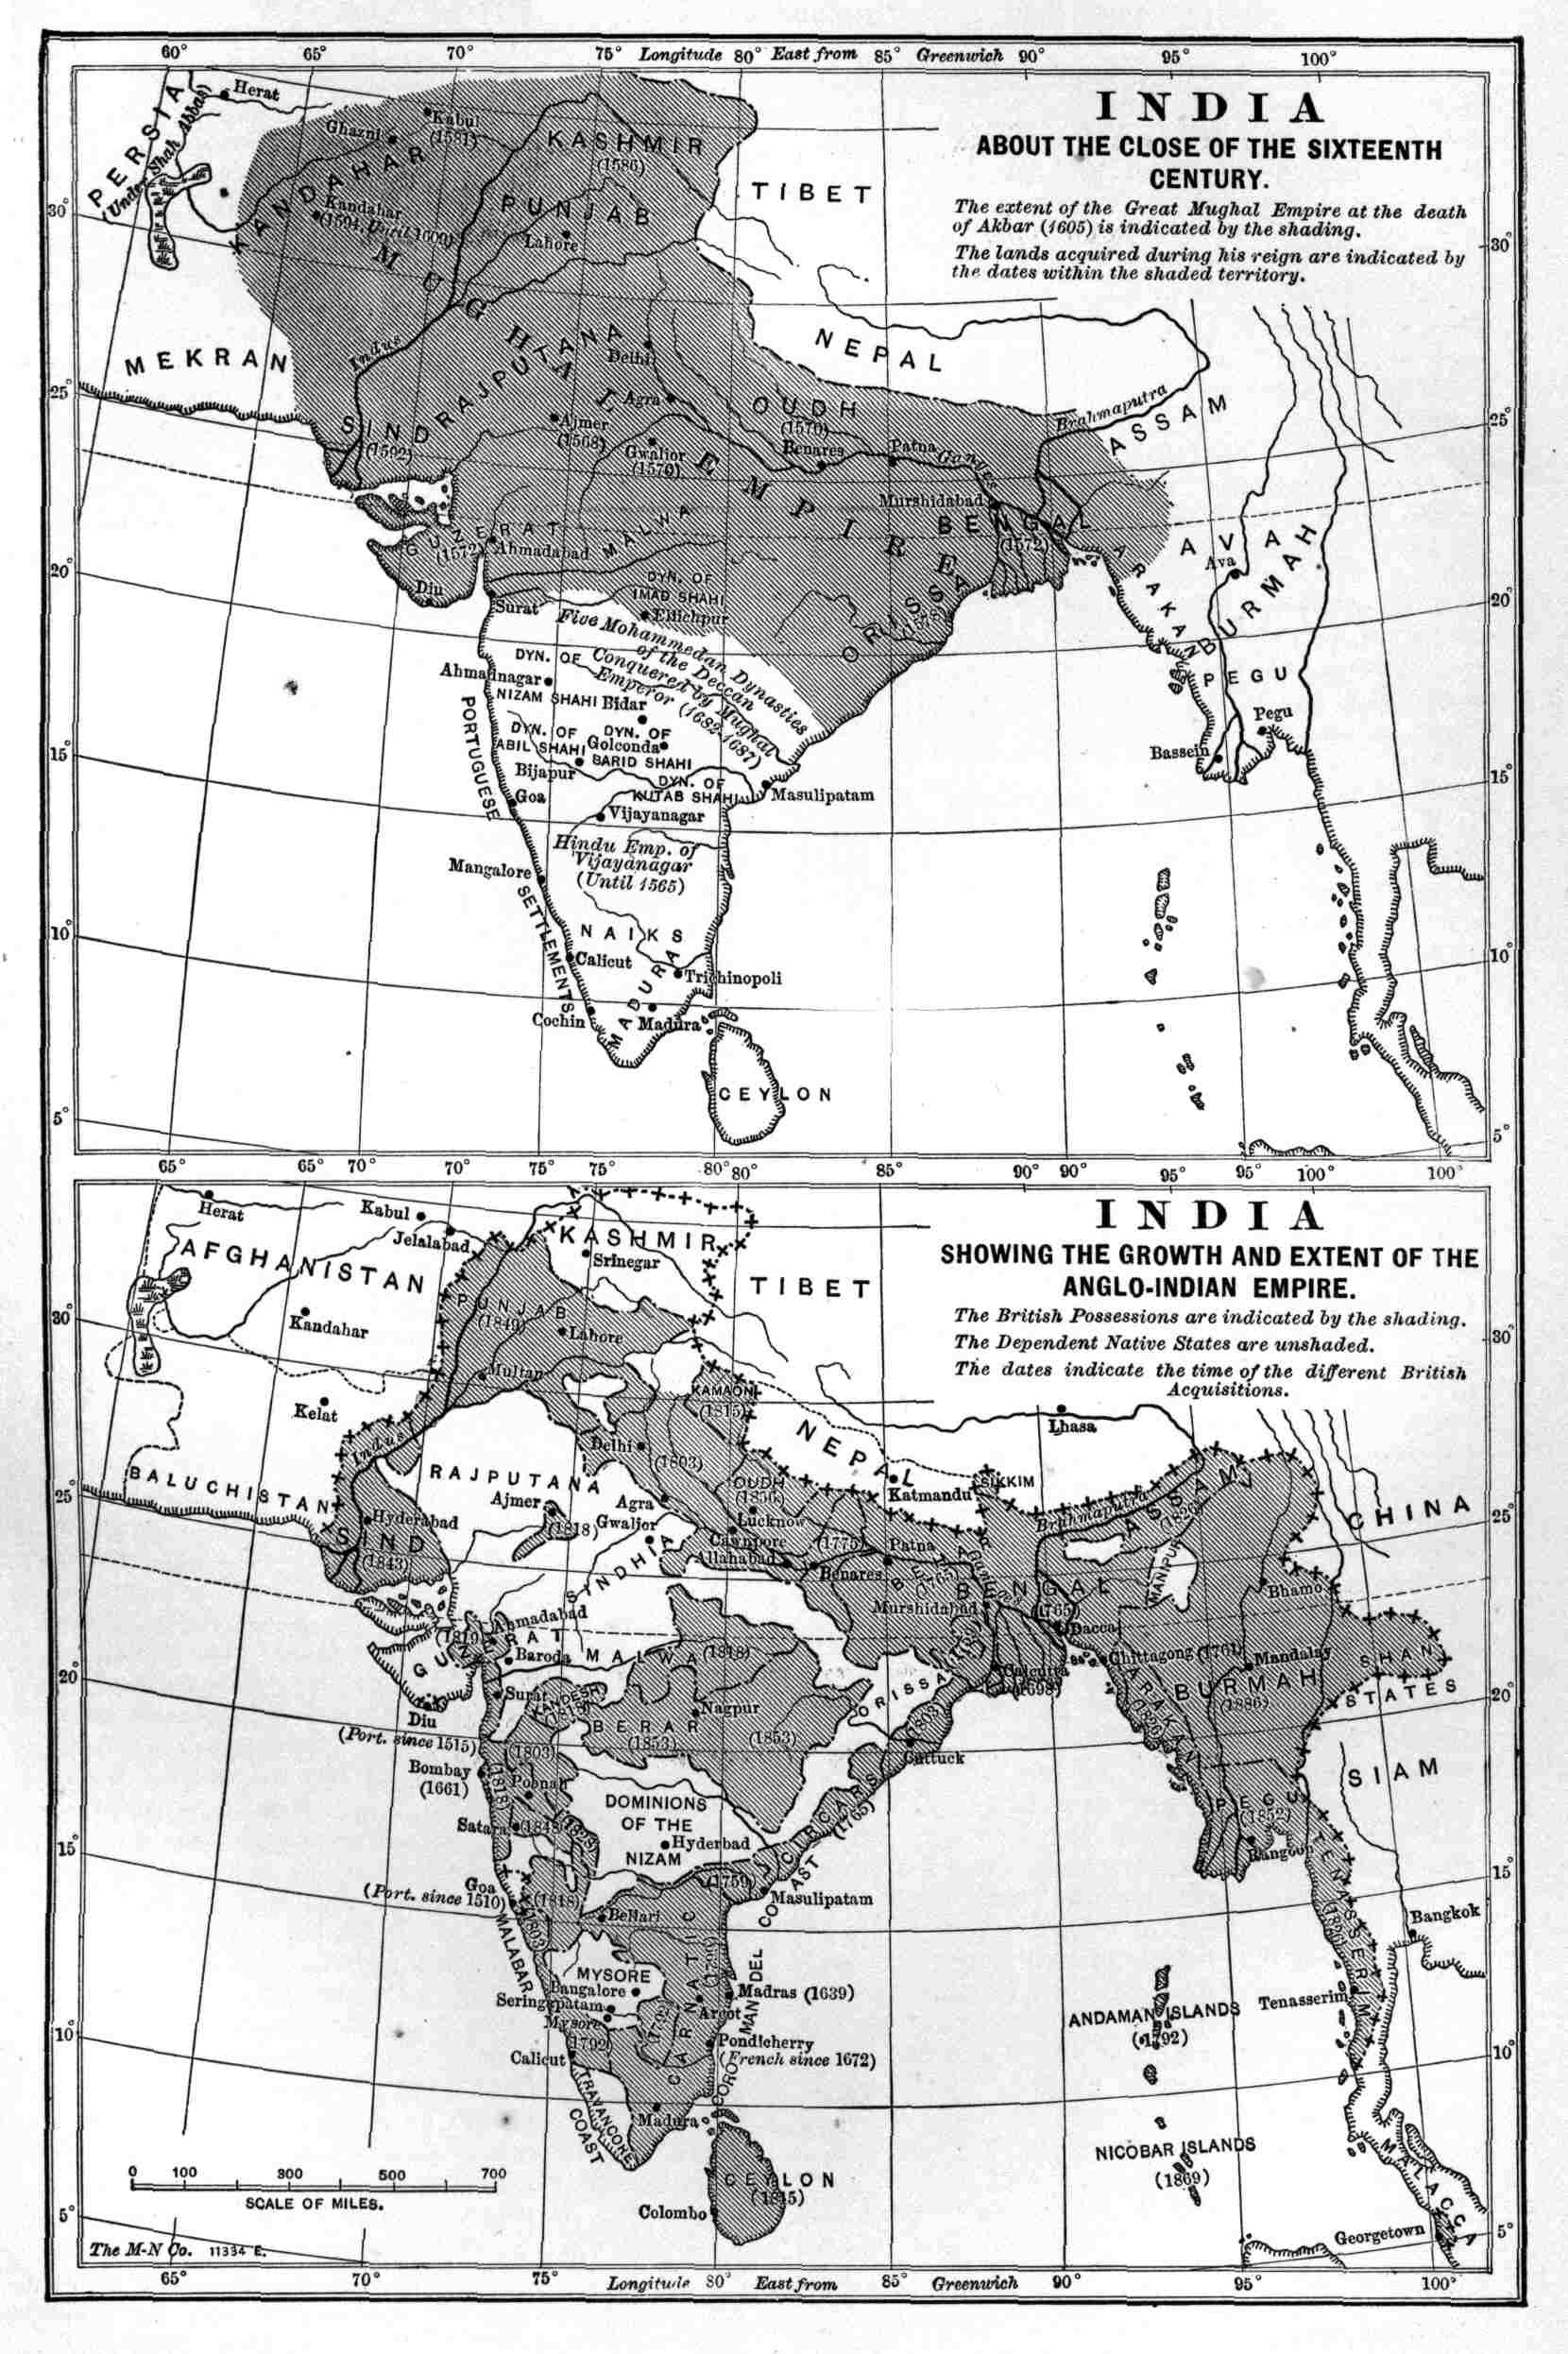 Map of India, about the close
 of the Sixteenth Century, and map of the growth of the
Anglo-Indian Empire.